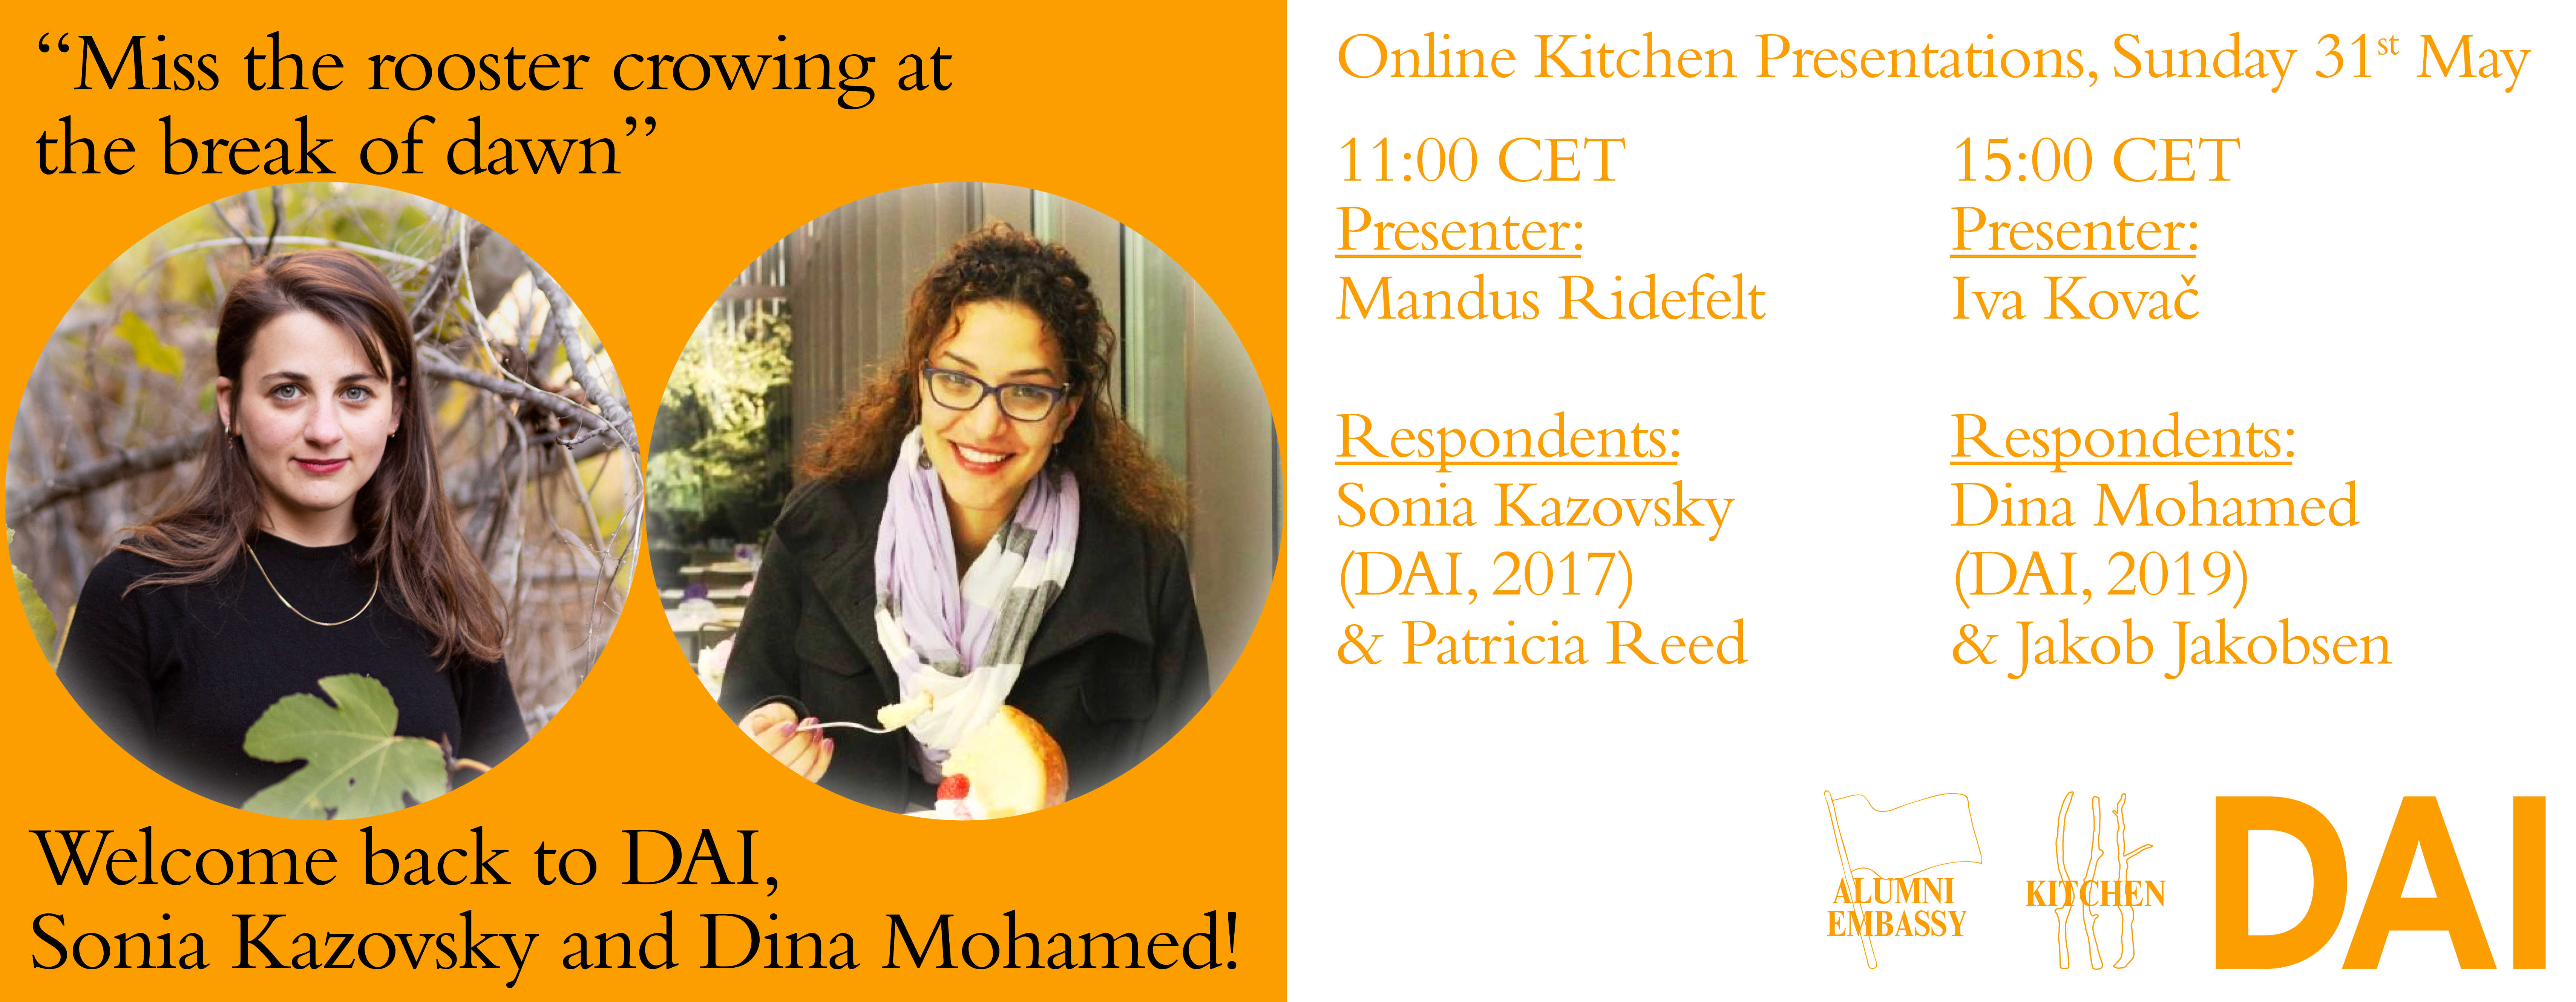 Welcome back to DAI, Sonia Kazovsky & Dina Mohamed!